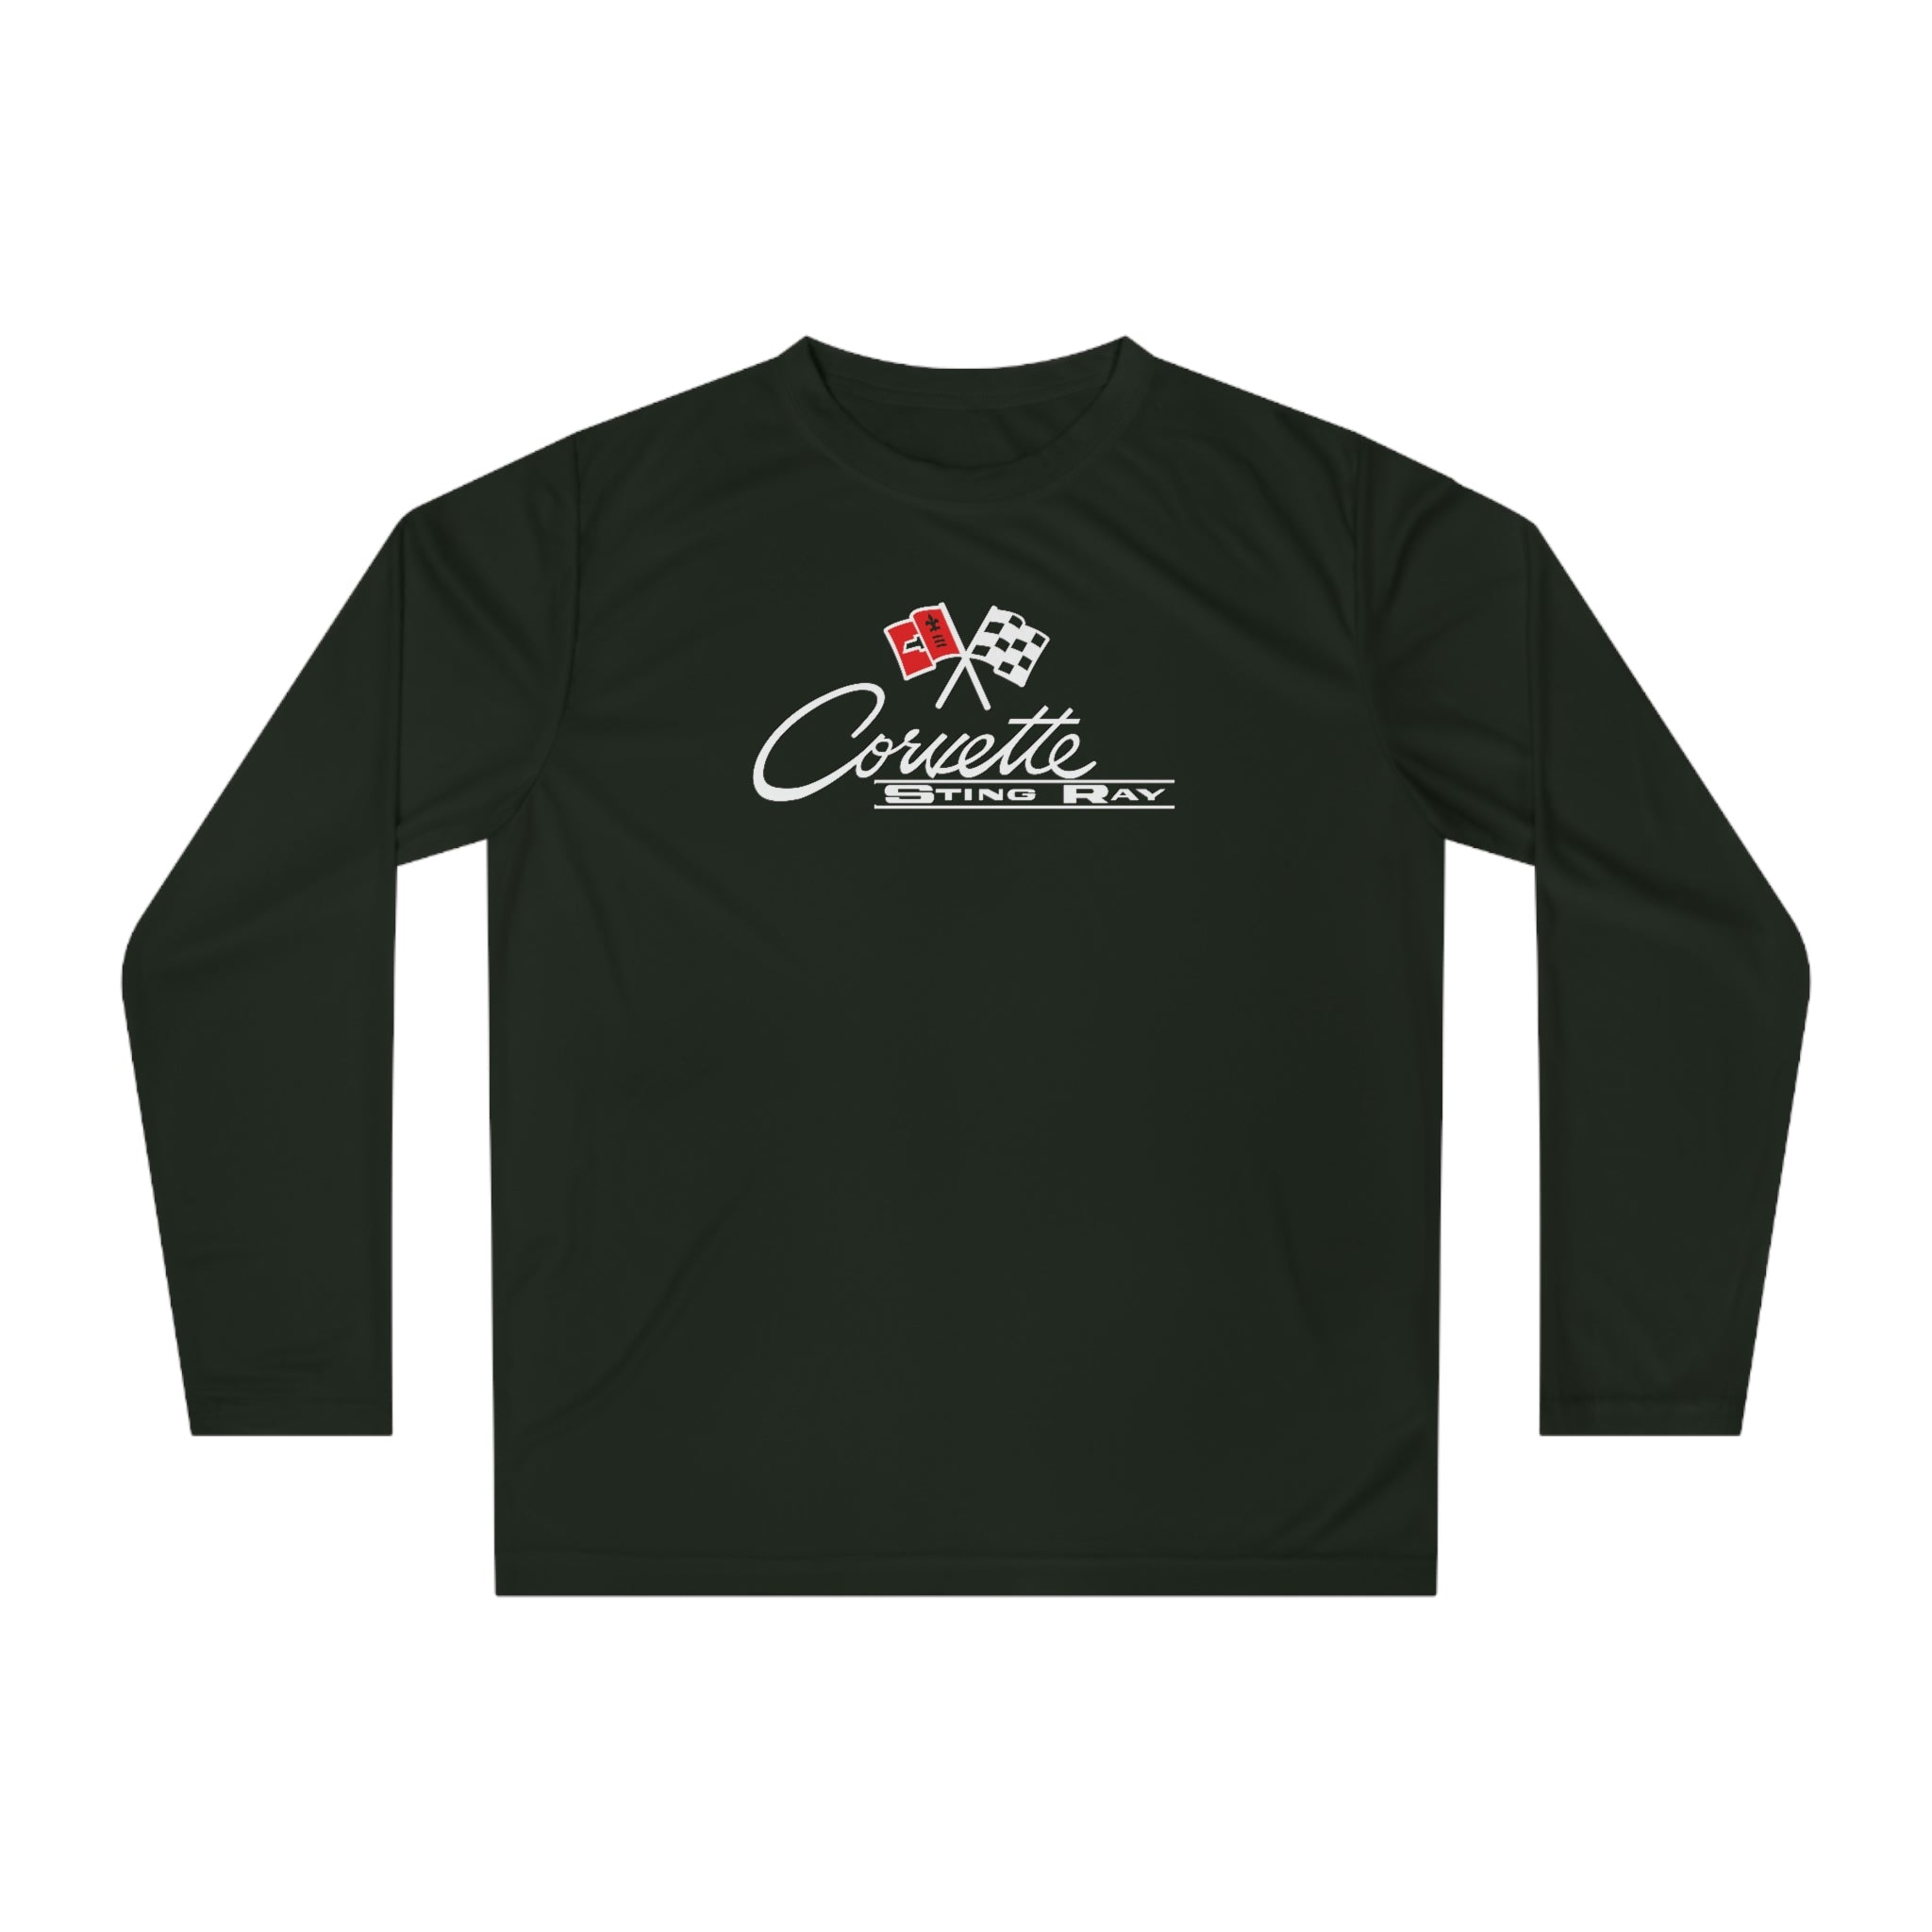 c2-corvette-performance-upf-40-uv-protection-long-sleeve-shirt-perfect-for-all-outdoor-activities